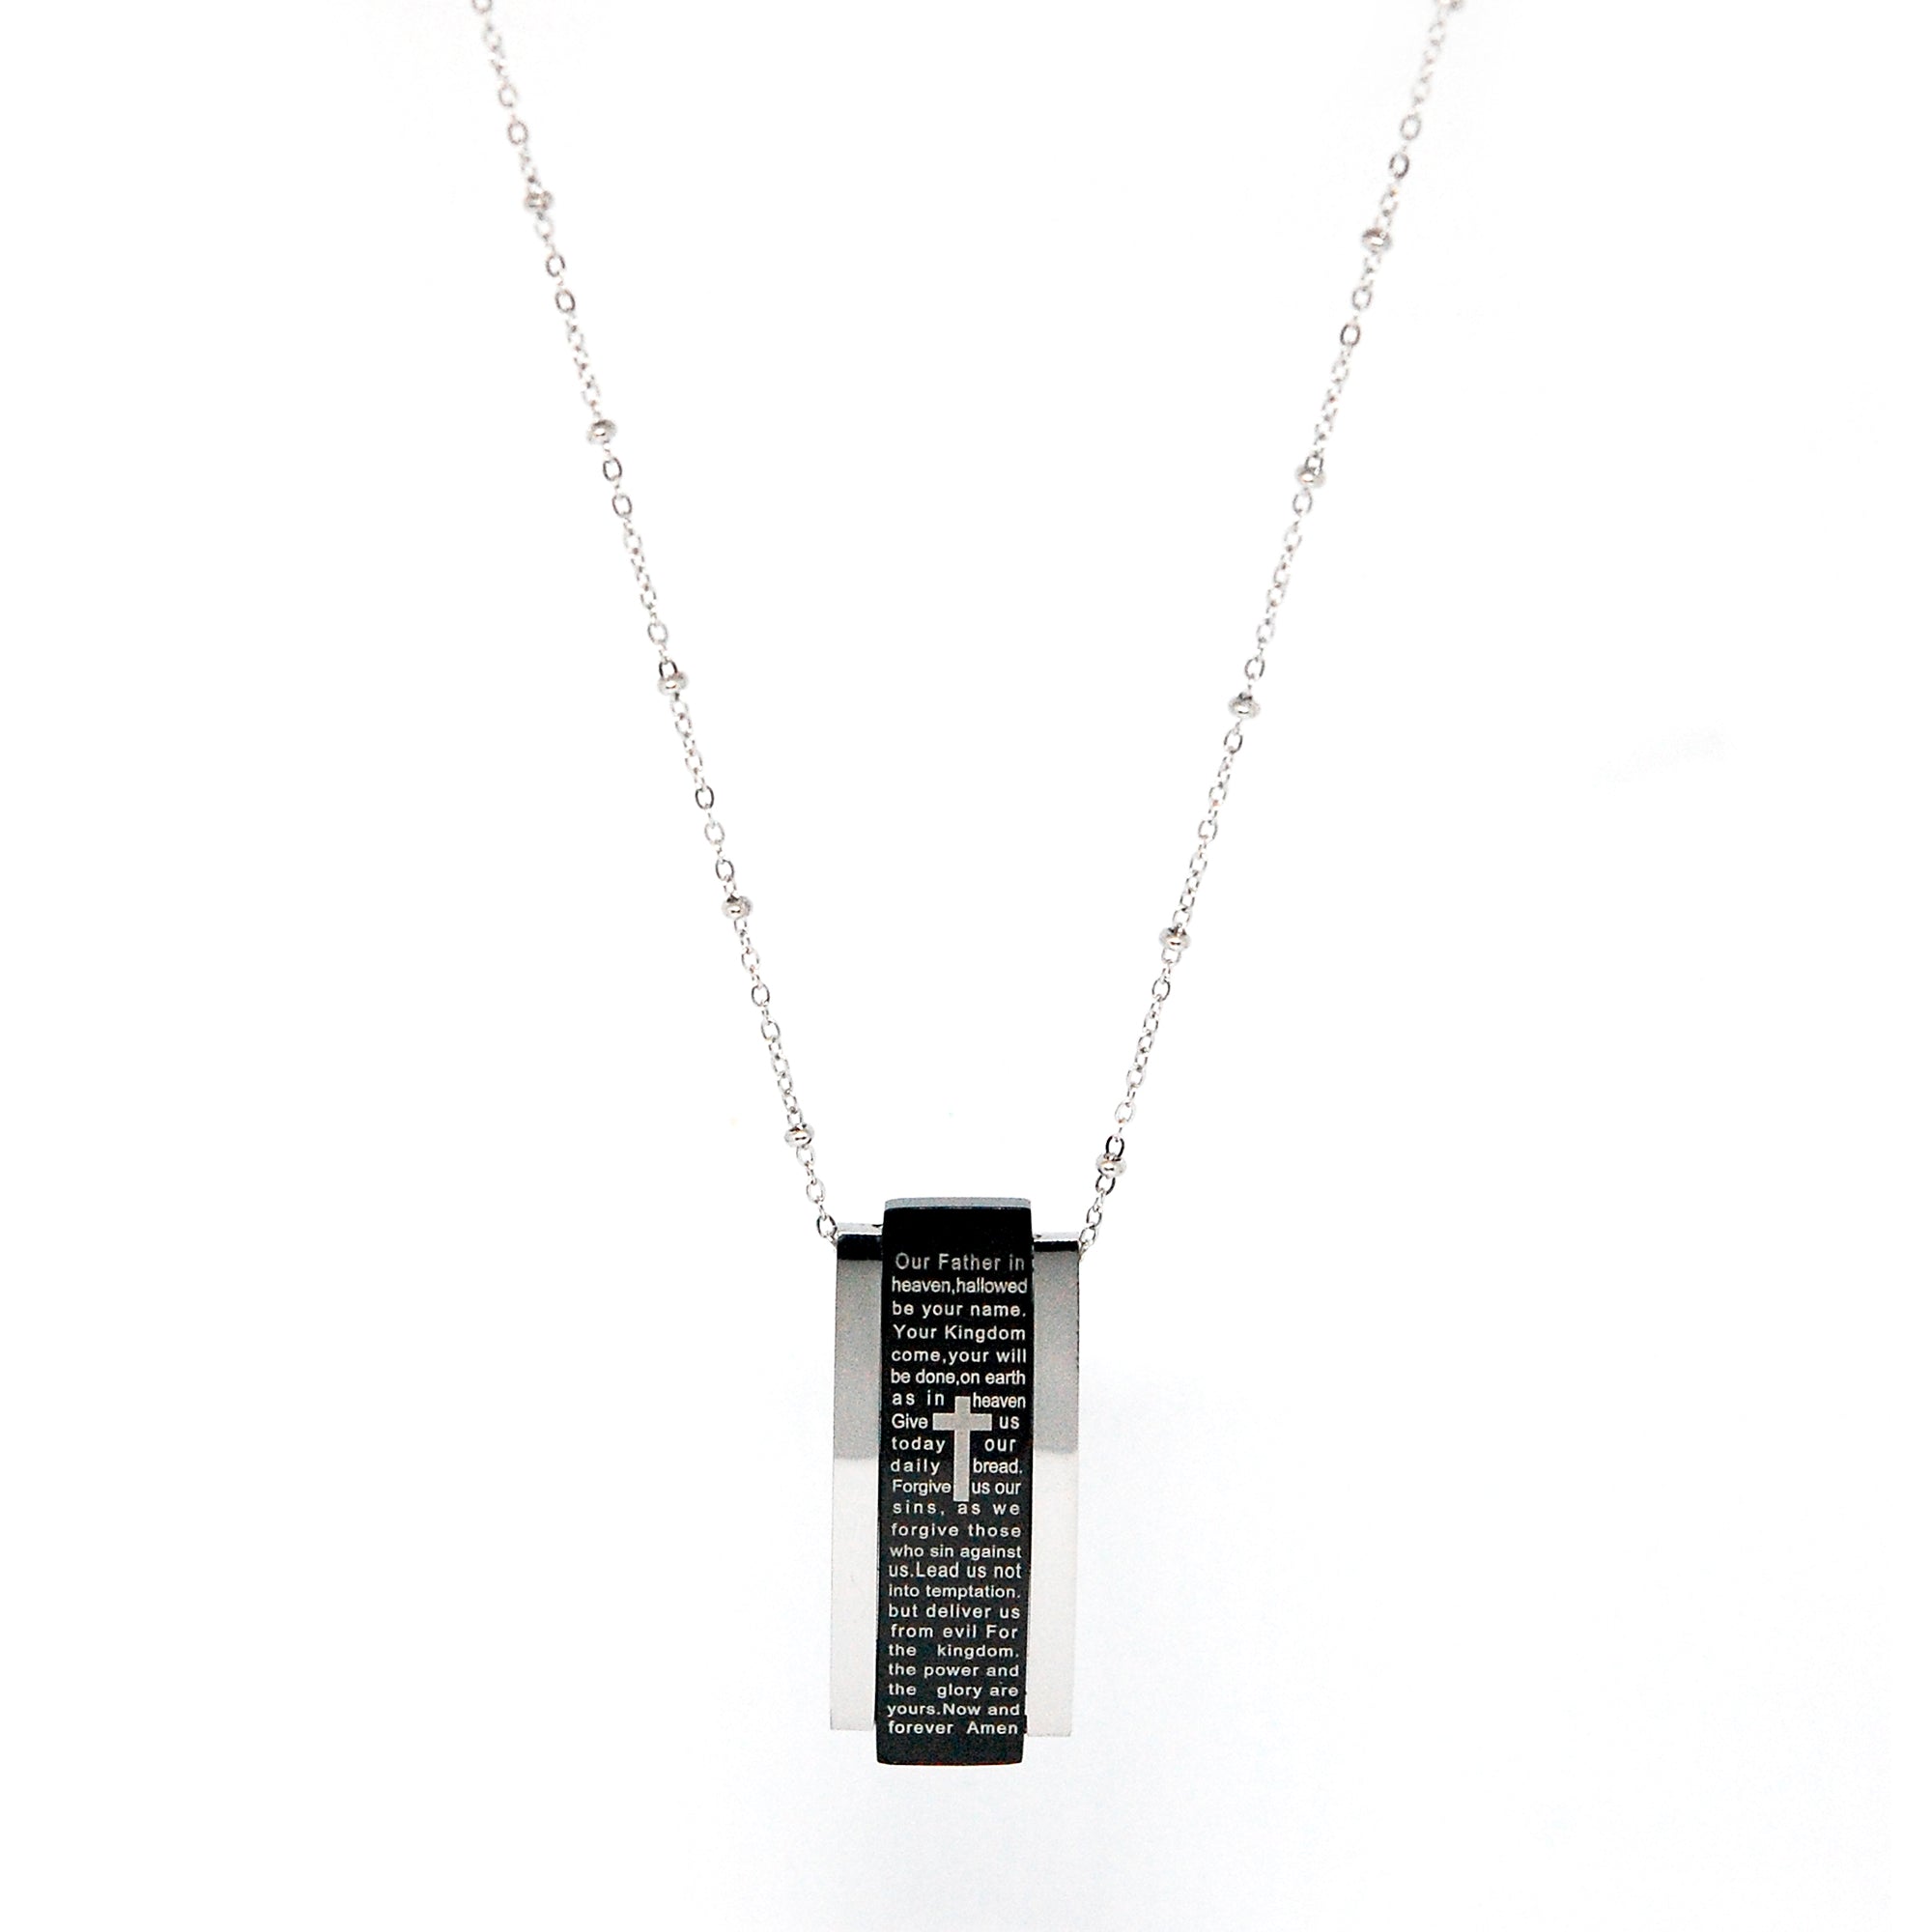 ESN 7189: Black & White Lord's Prayer Necklace w/ 19.5" S/S Link w/ Ball Chain